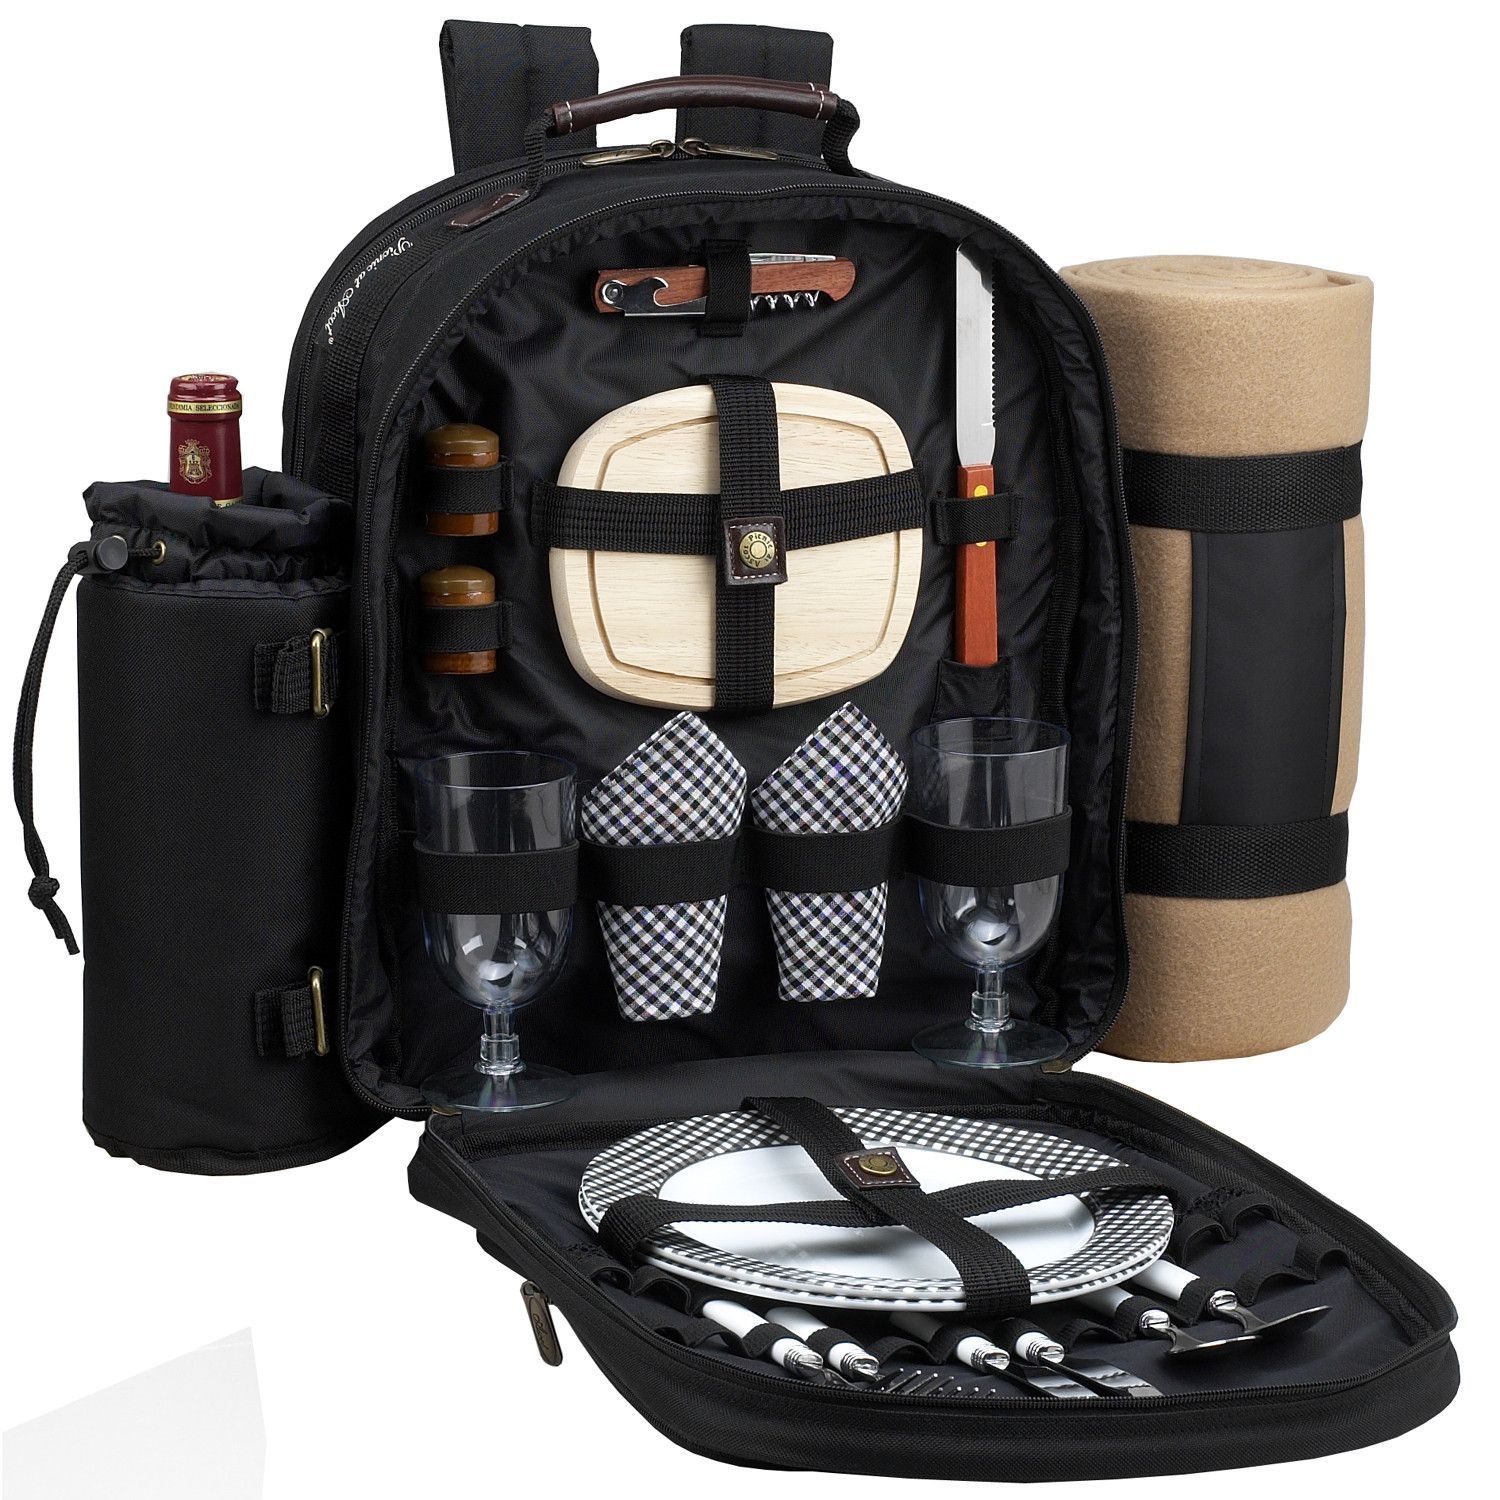 Spacious Backpack With a Cooler and Two Place Settings